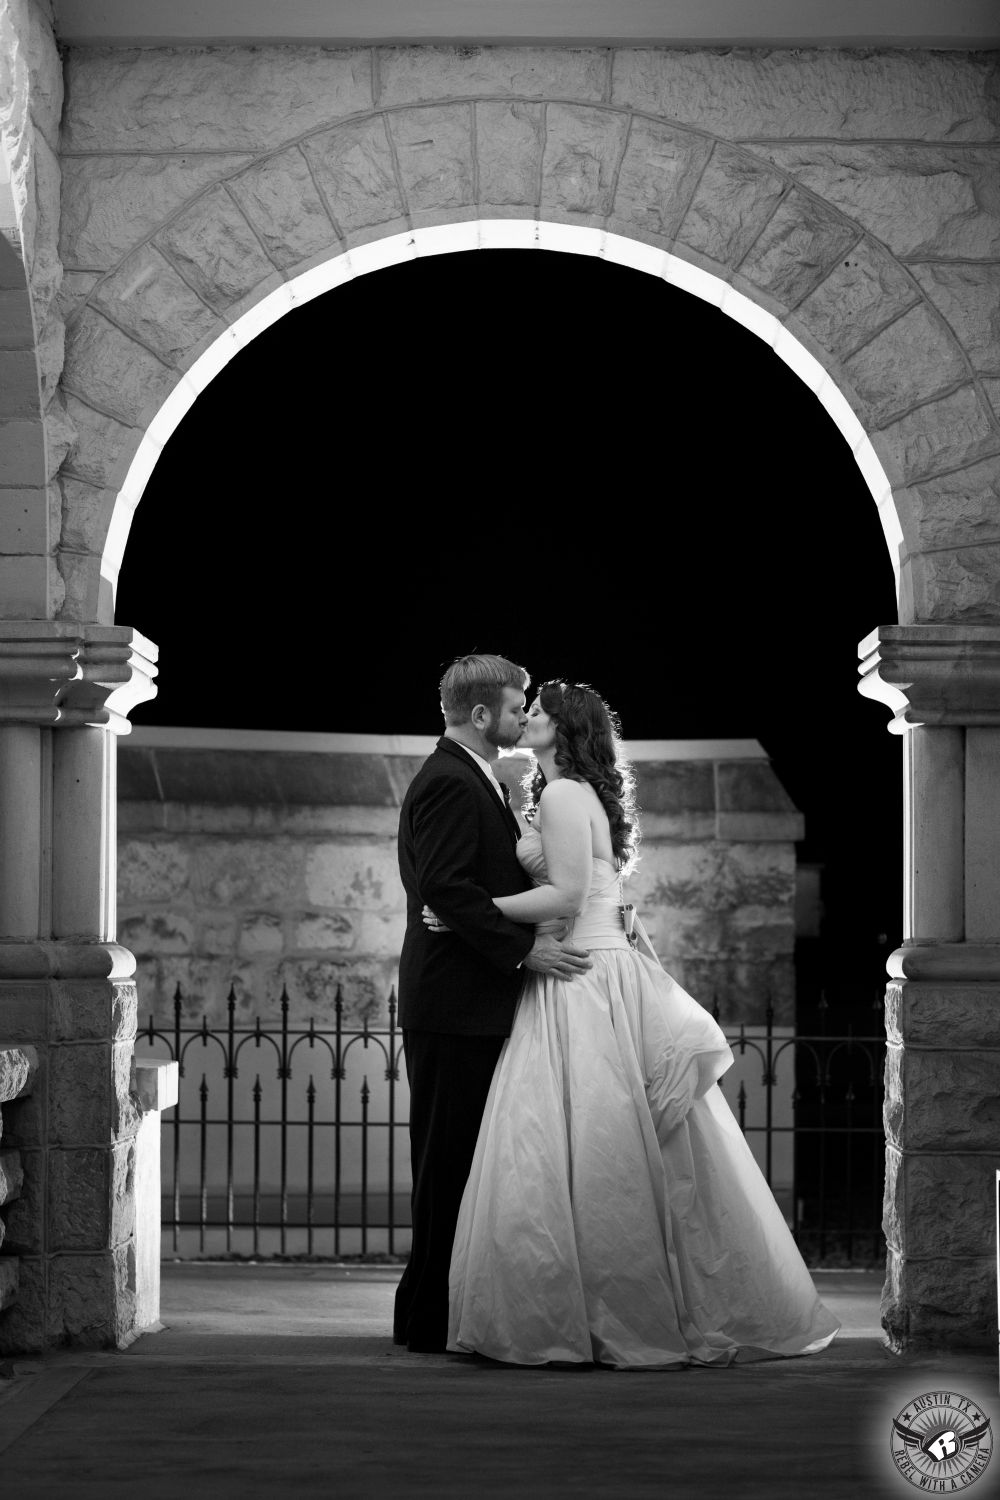 Dramatic black and white image of bride and groom standing under limestone arch with wrought iron fence in the background at night at Chateau Bellevue wedding venue in Austin.